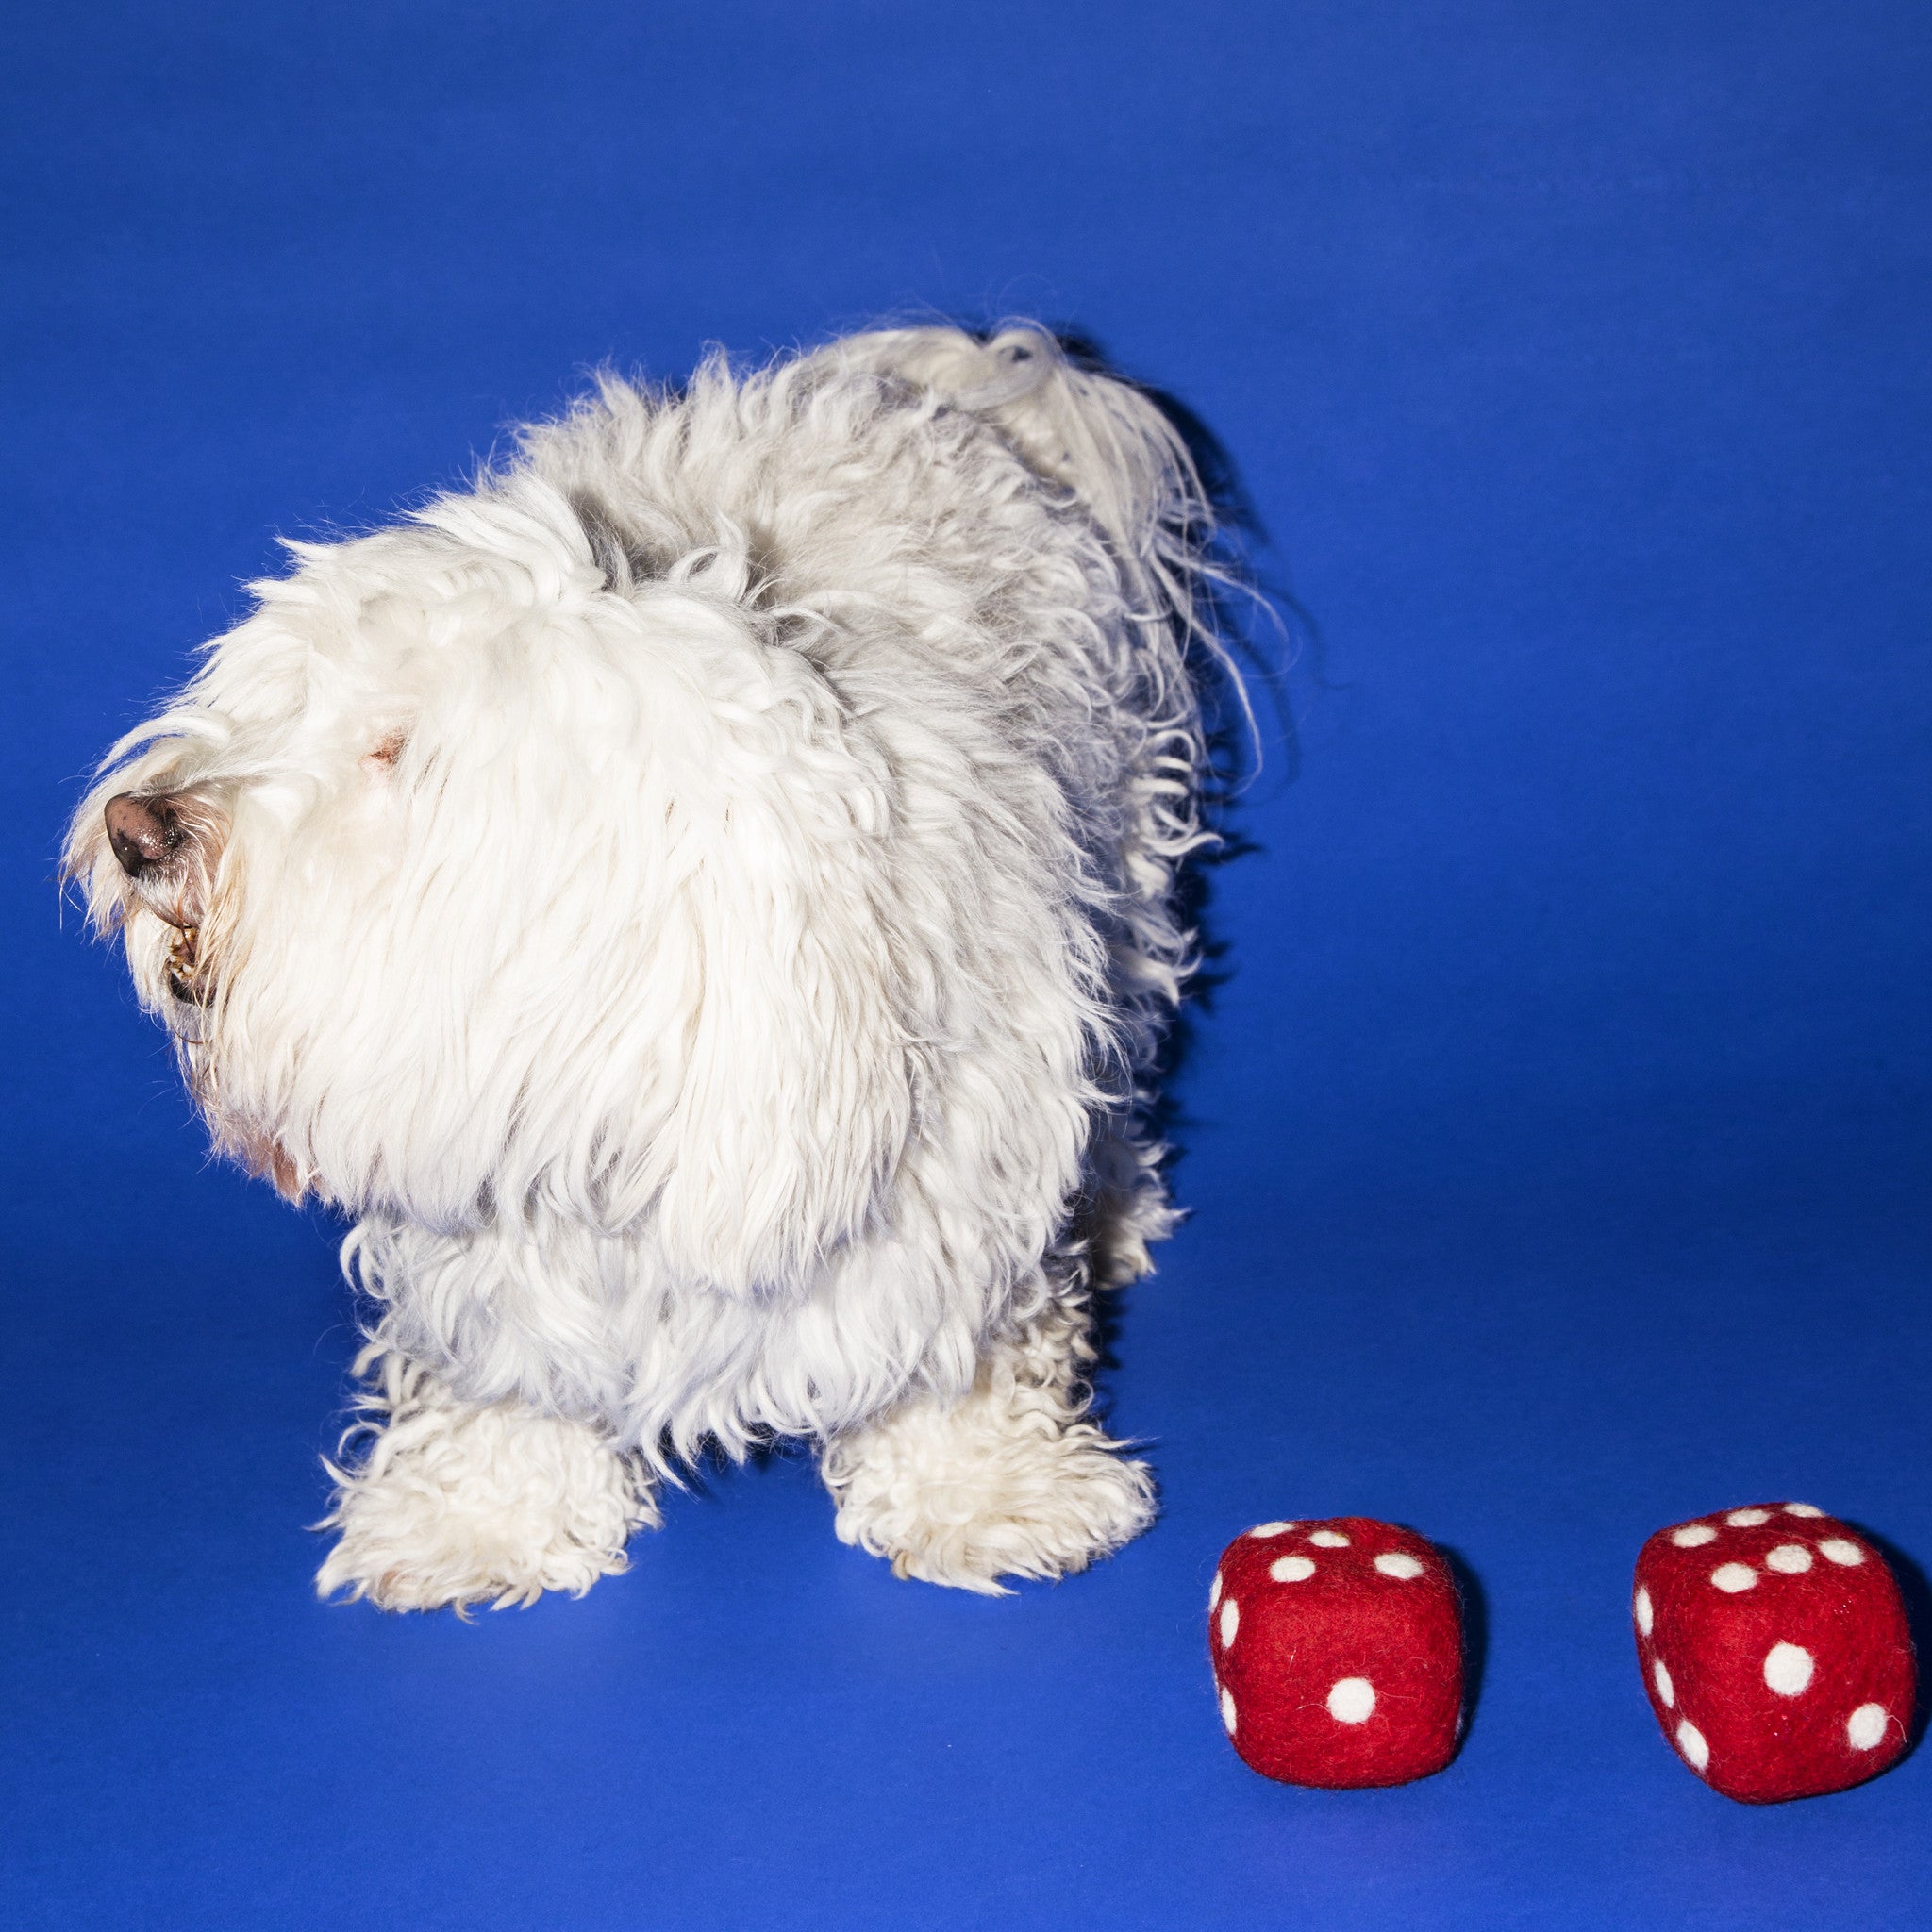 Dog Toy: Boiled Wool Pair of Dice